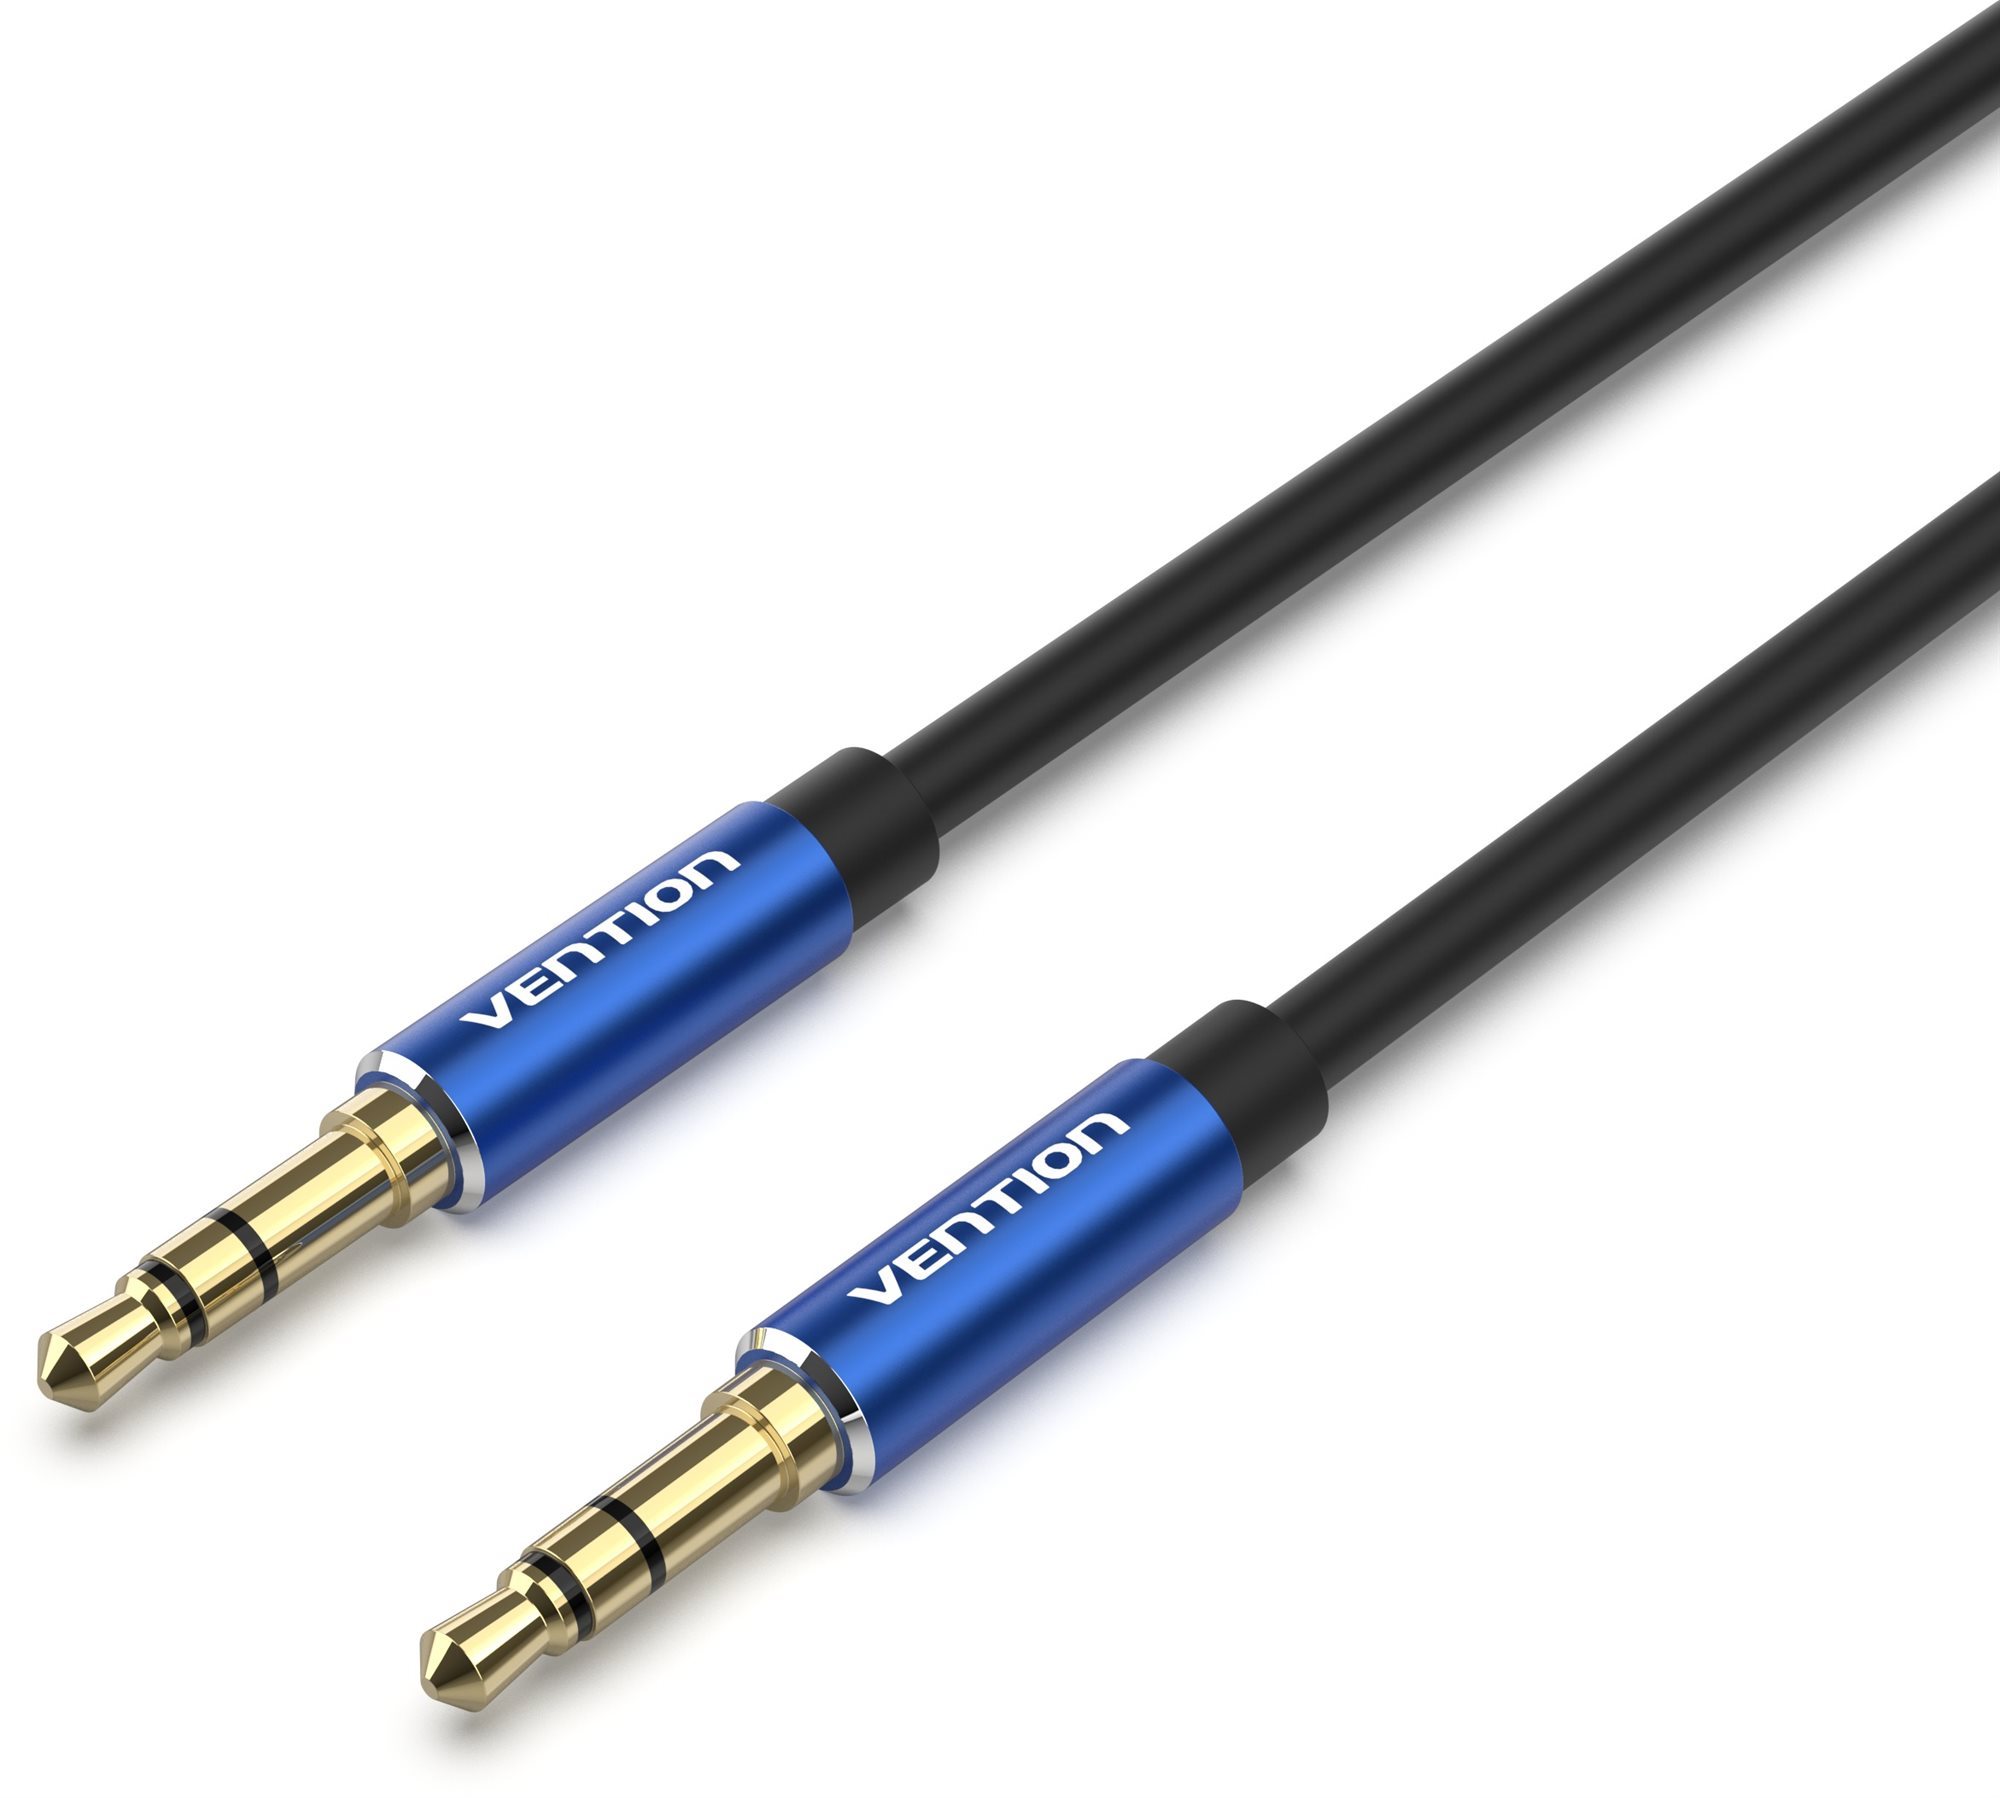 Vention 3,5 mm Male to Male Audio Cable 3 m Blue Aluminum Alloy Type